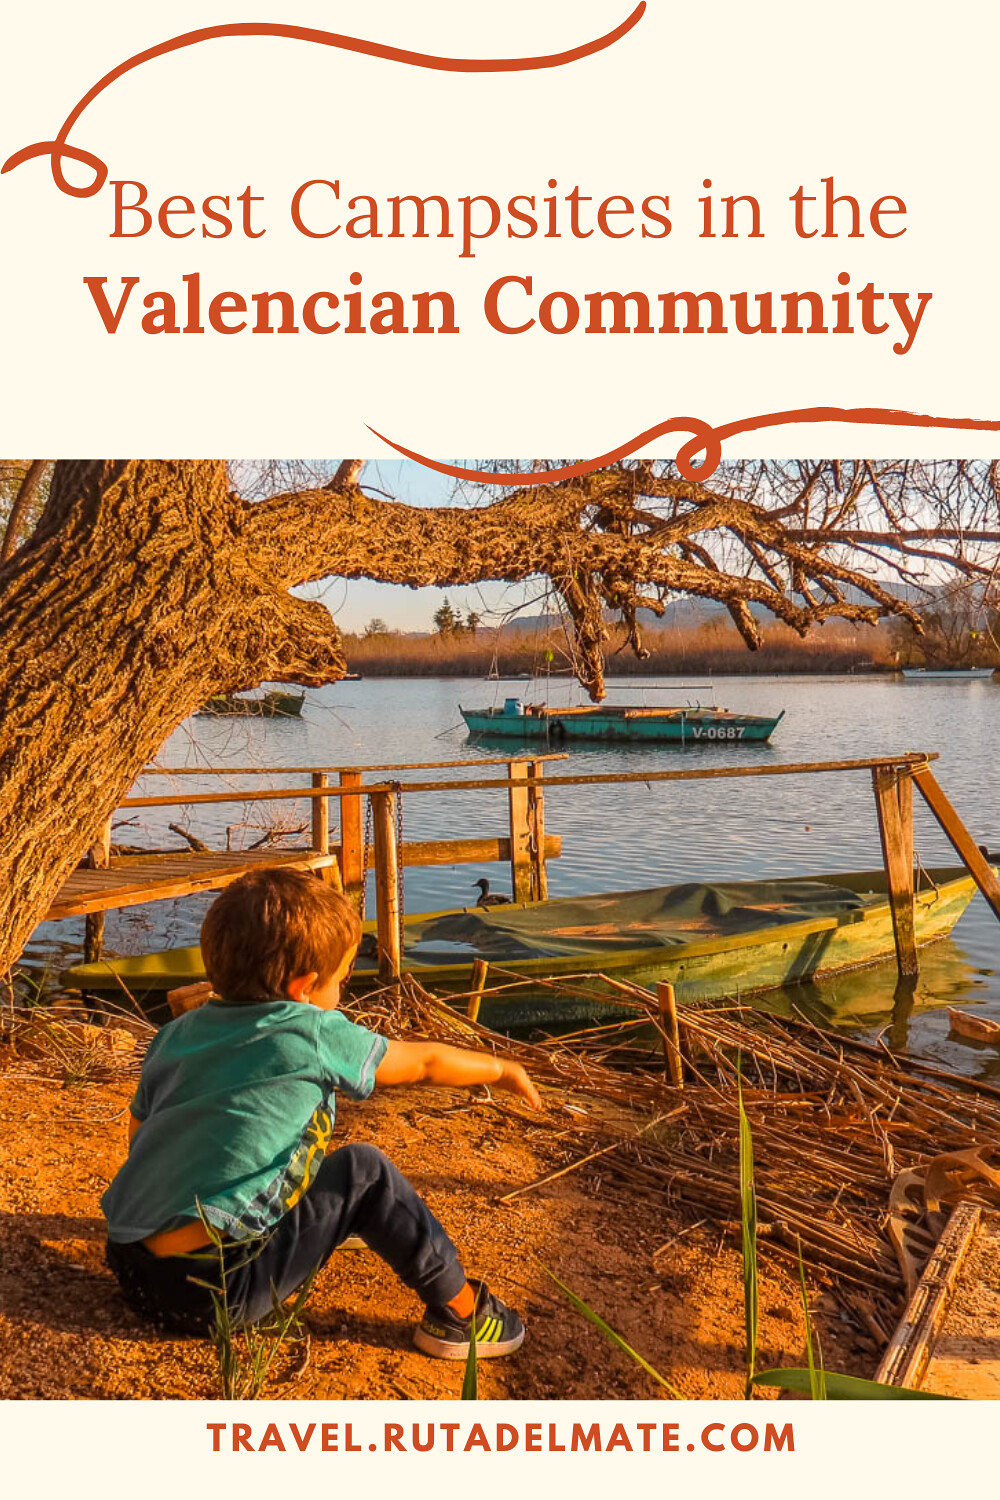 Best Campsites in the Valencian Community